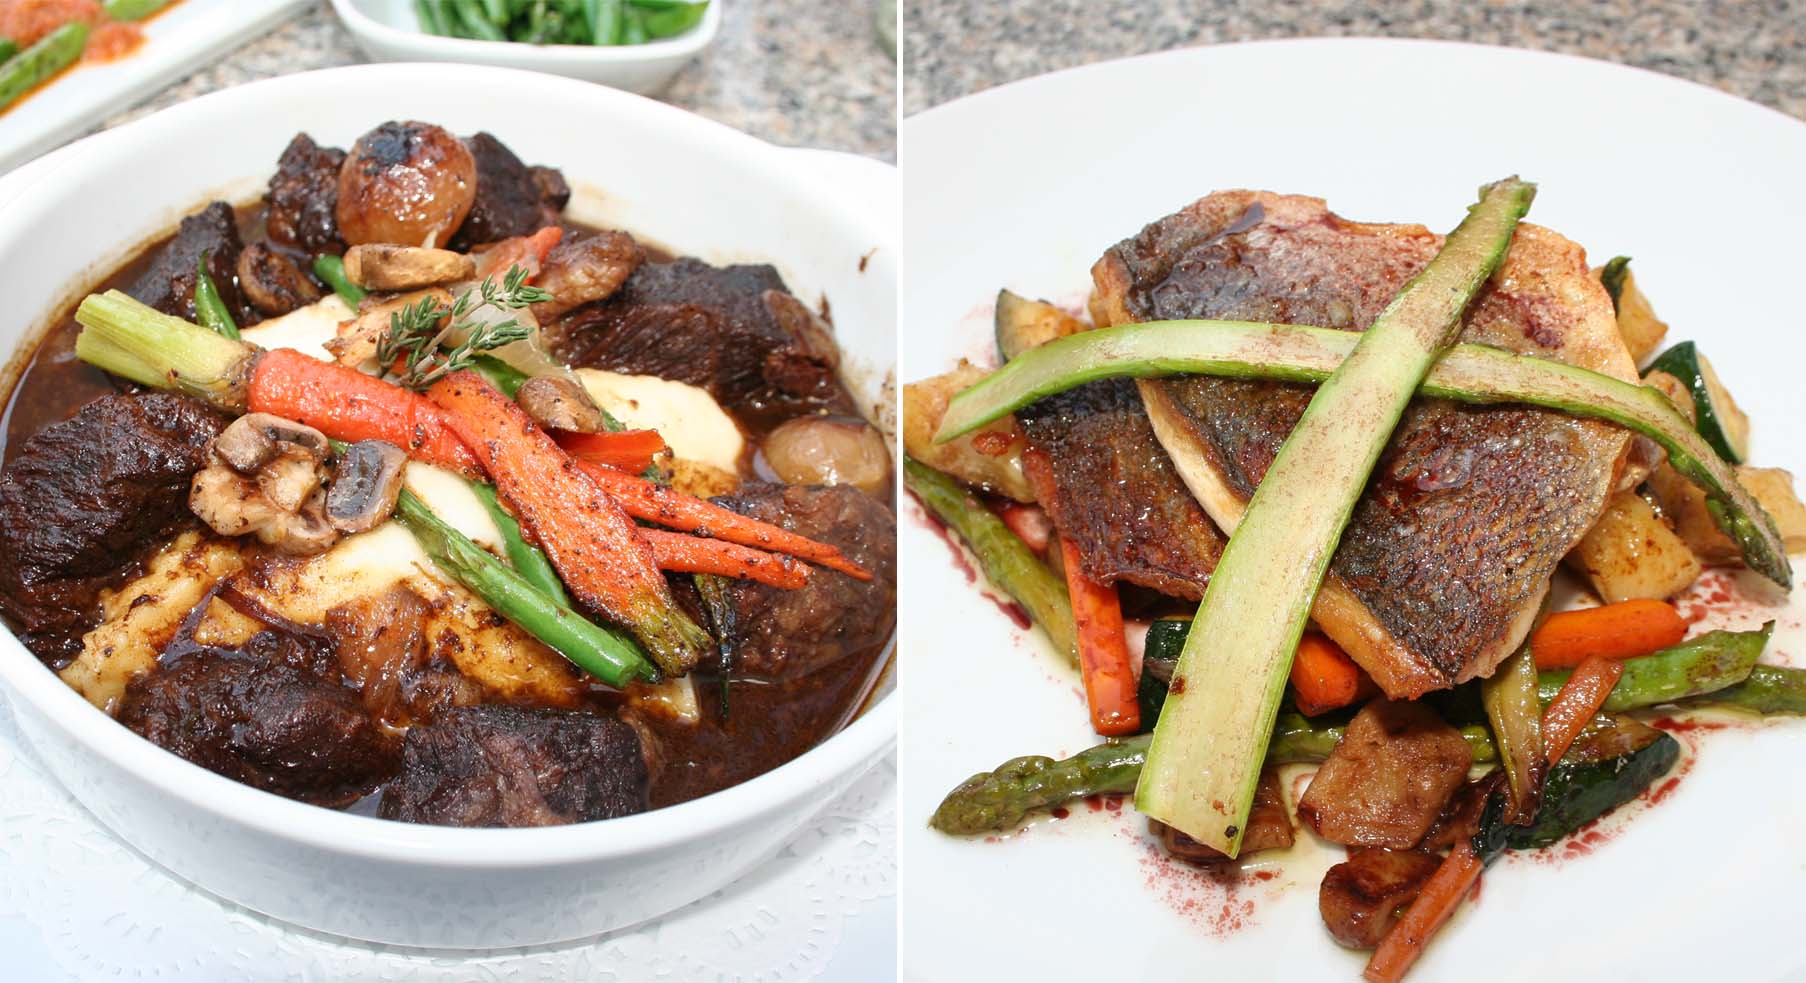 The boeuf bourguignon was delicious and the dorade royale perfectly prepared. (Photos: Mark Heckathorn/DC on Heels)